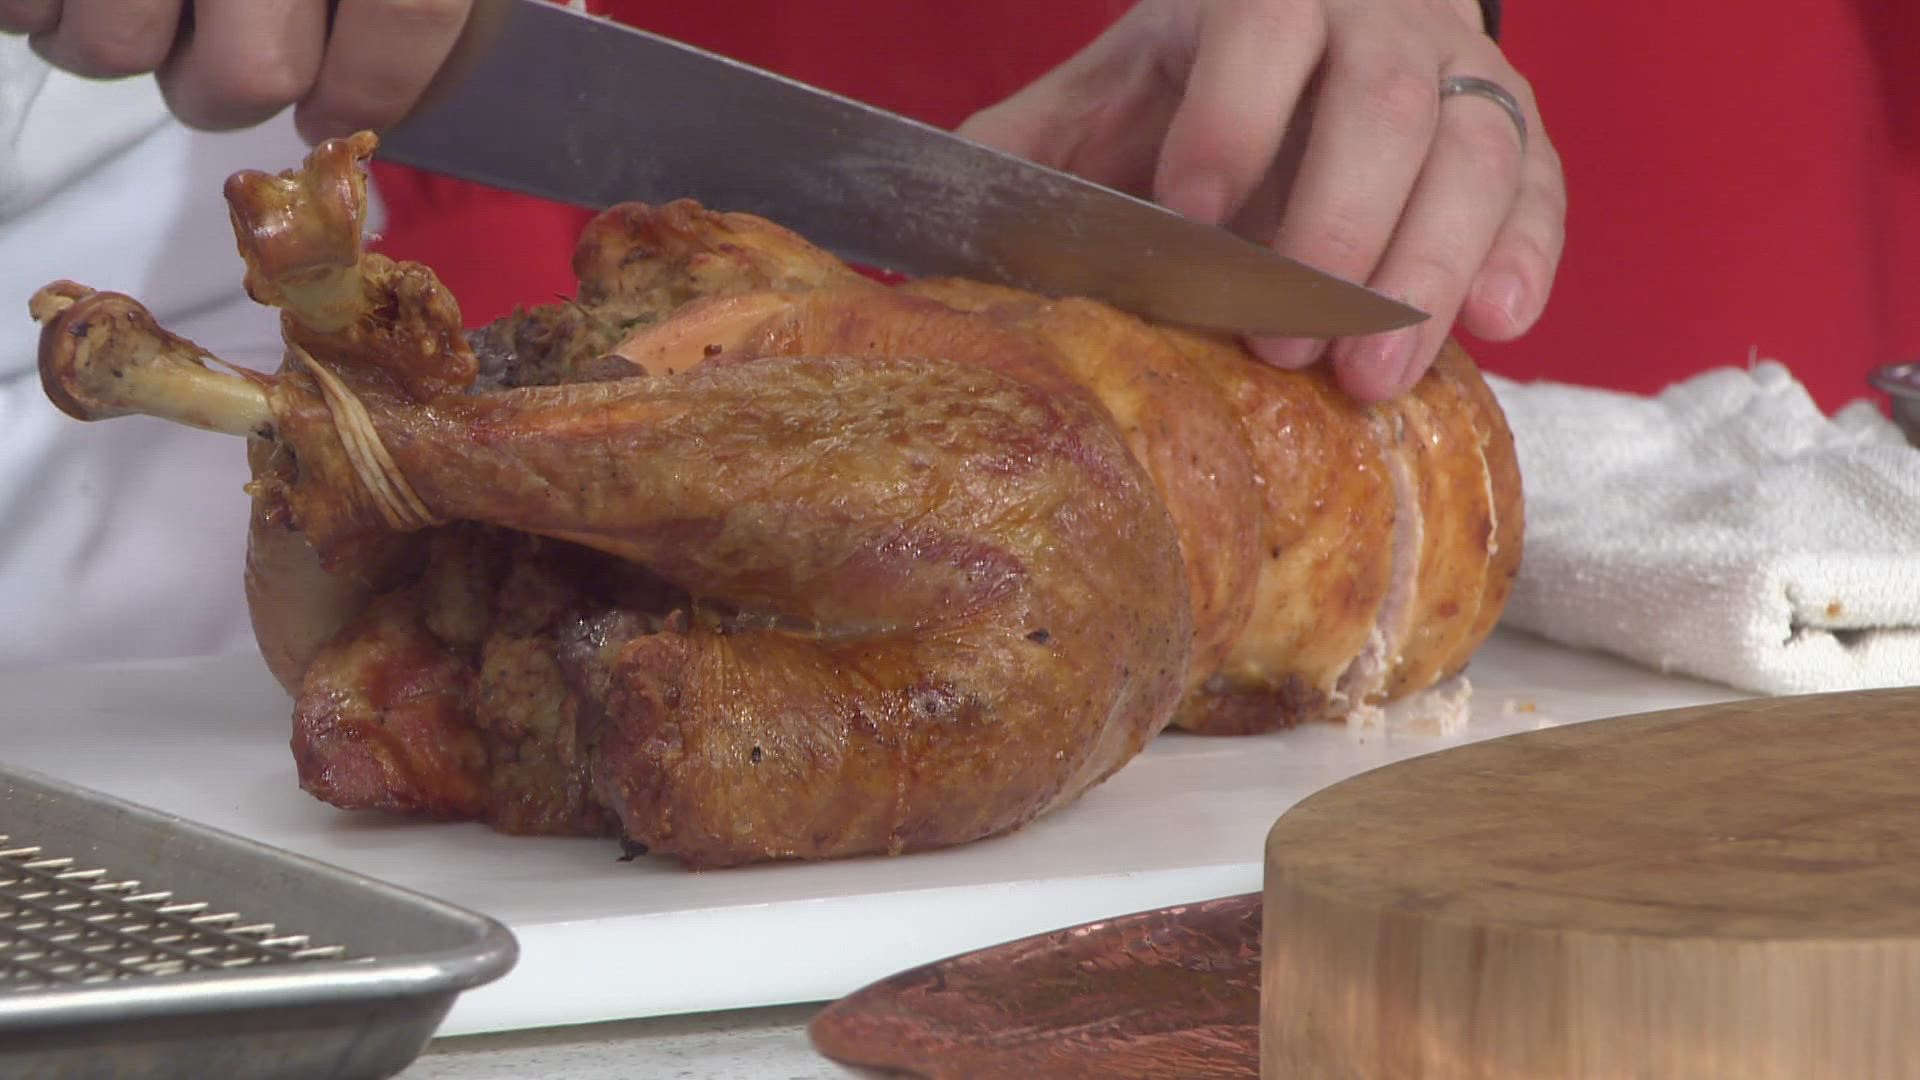 Chef Justin Koslowsky shows us how he prepares a Thanksgiving turkey.